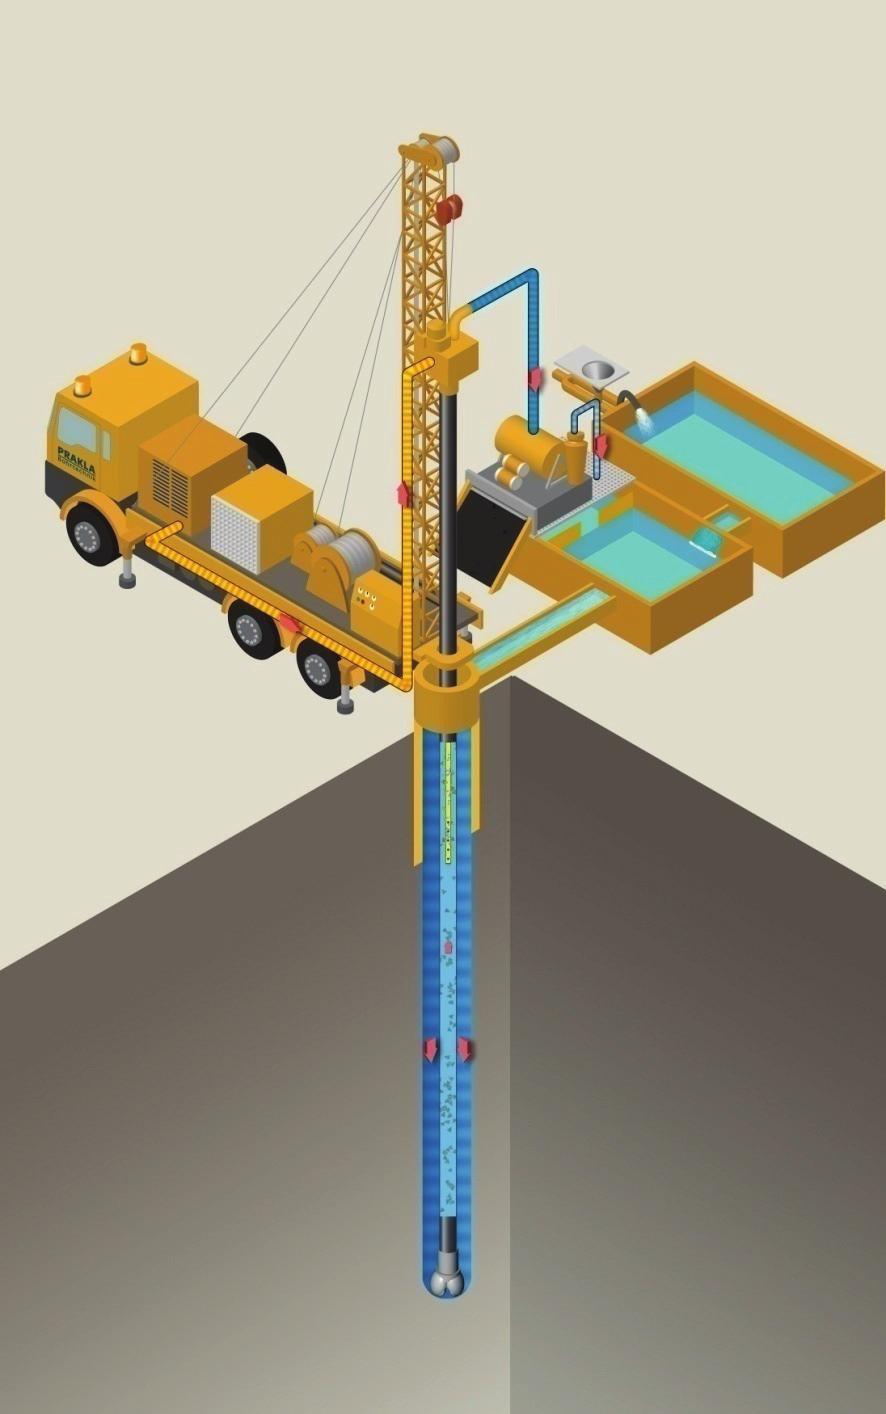 Case Study: RC Air-Lift Drilling Concept of a borehole being drilled using Reverse Circulation Air-lift Drilling: